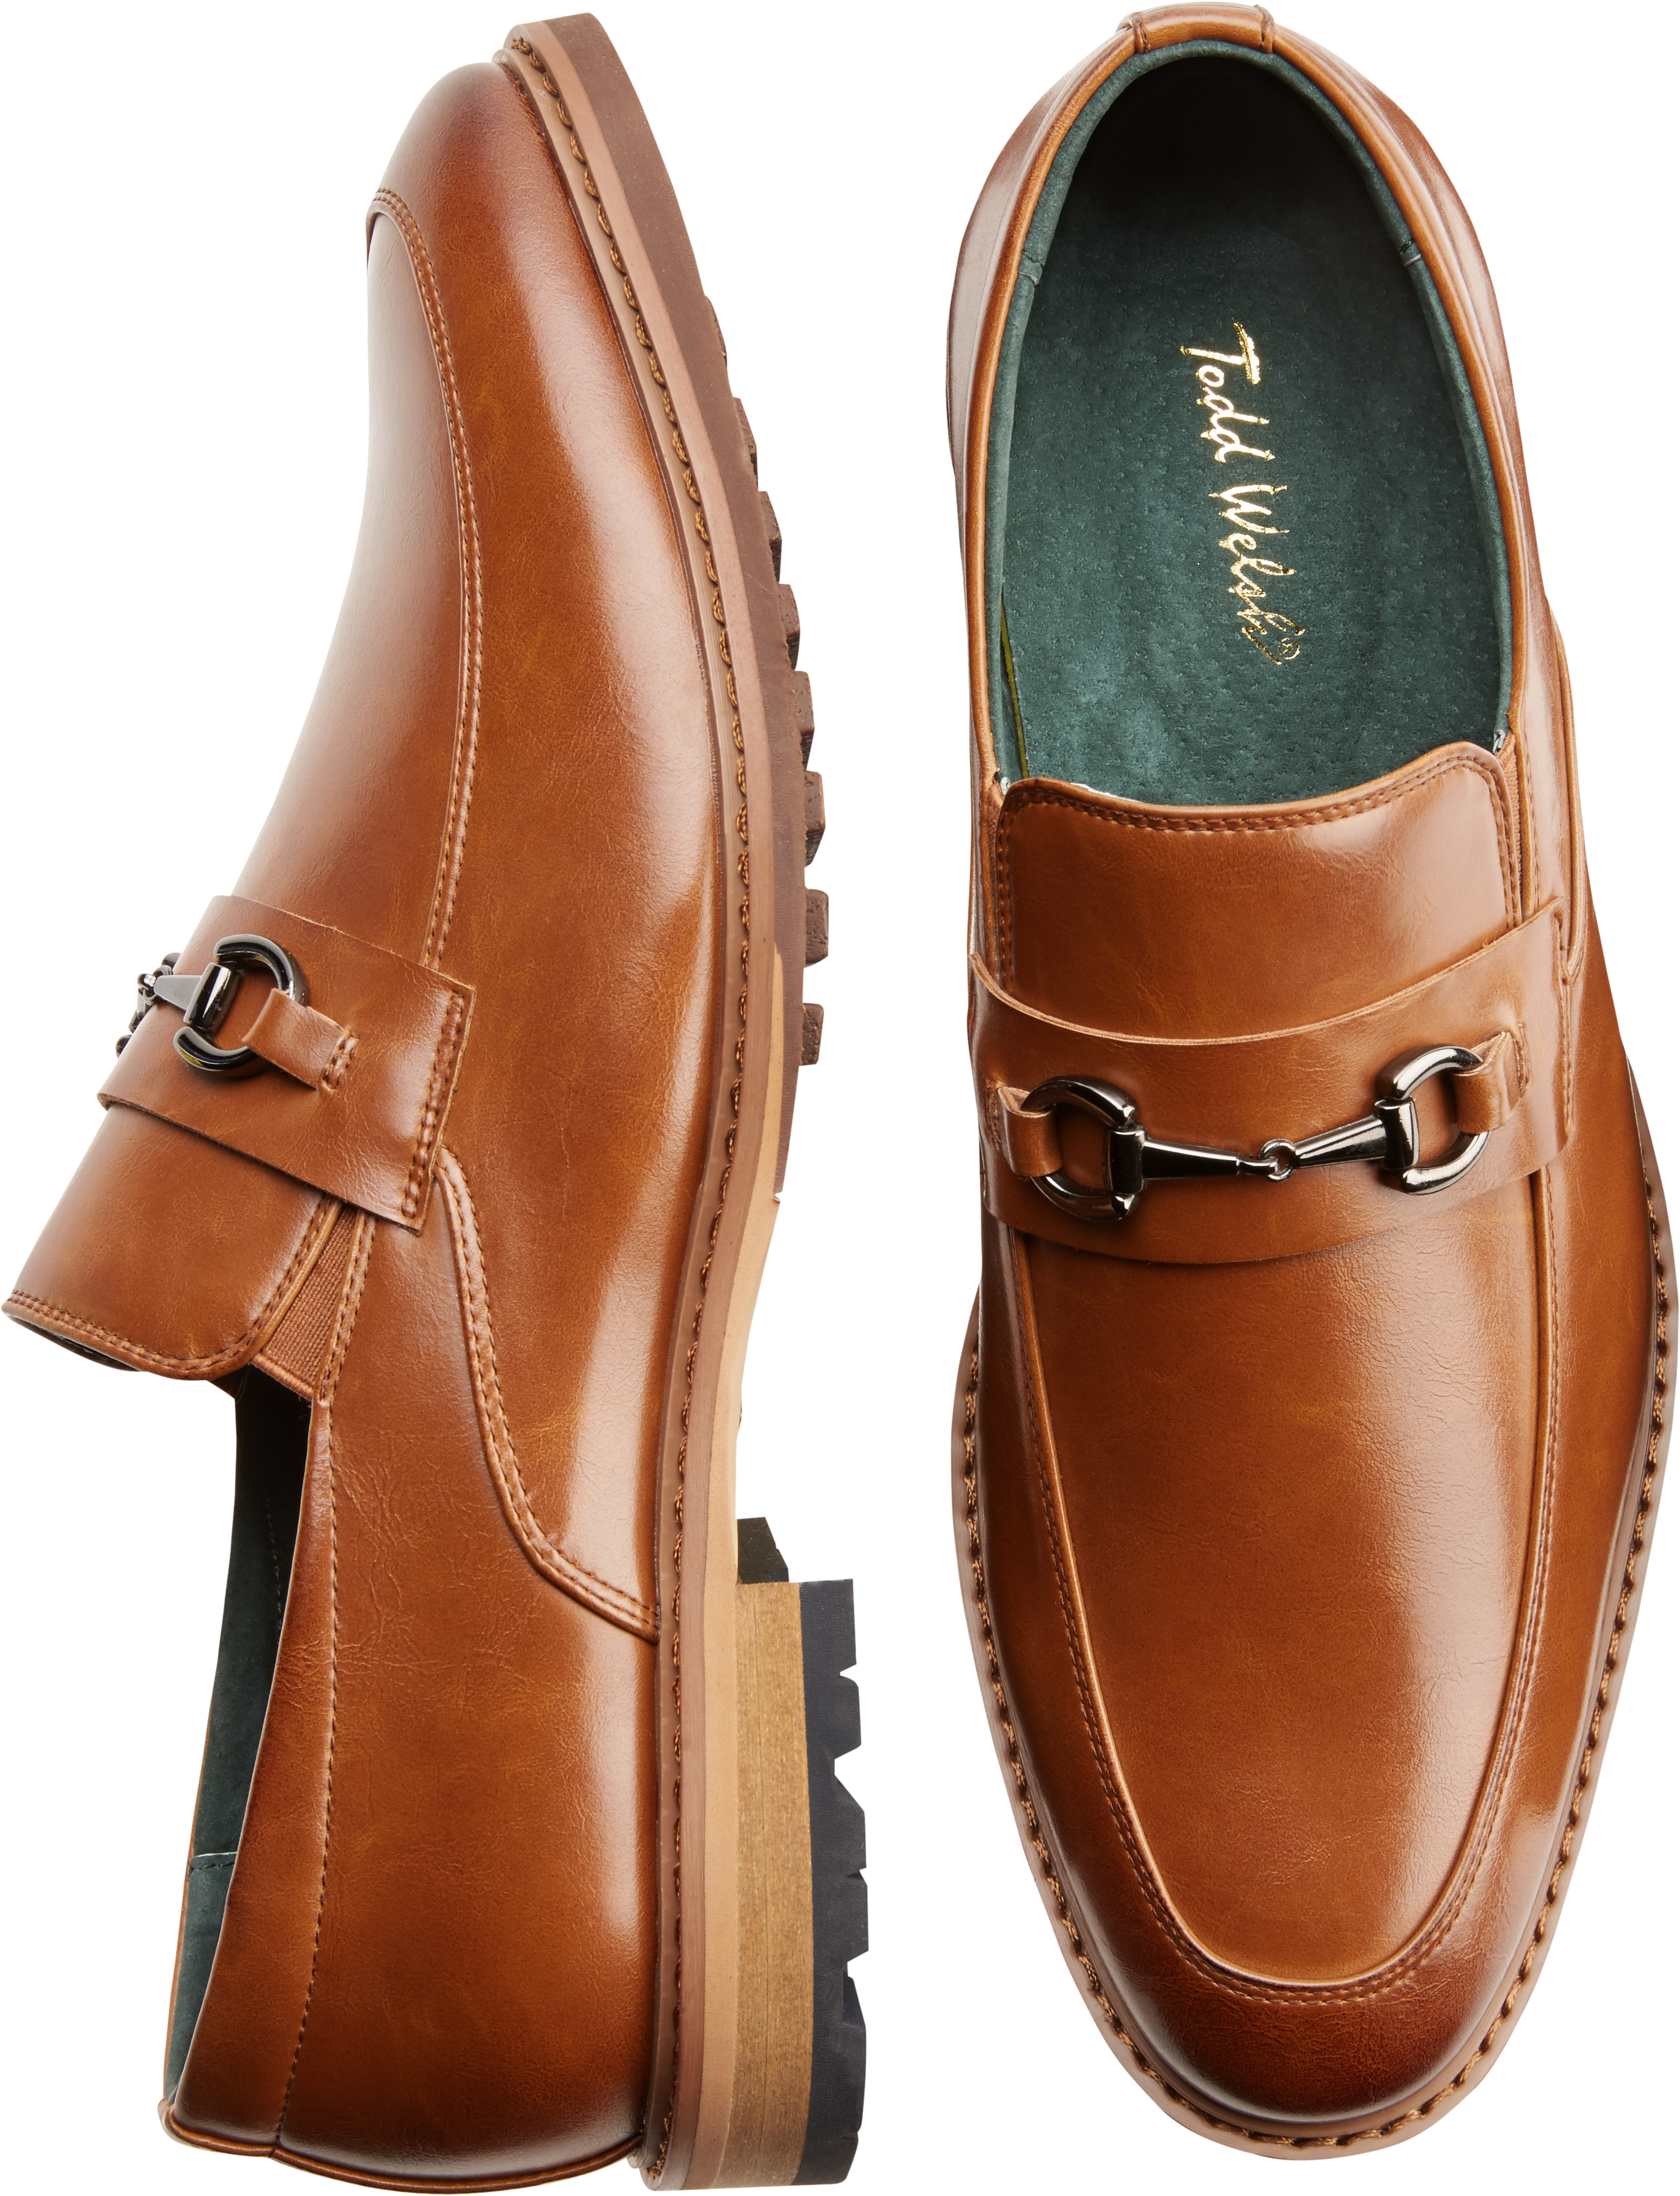 Todd Welsh Tan Loafers - Men's Shoes 